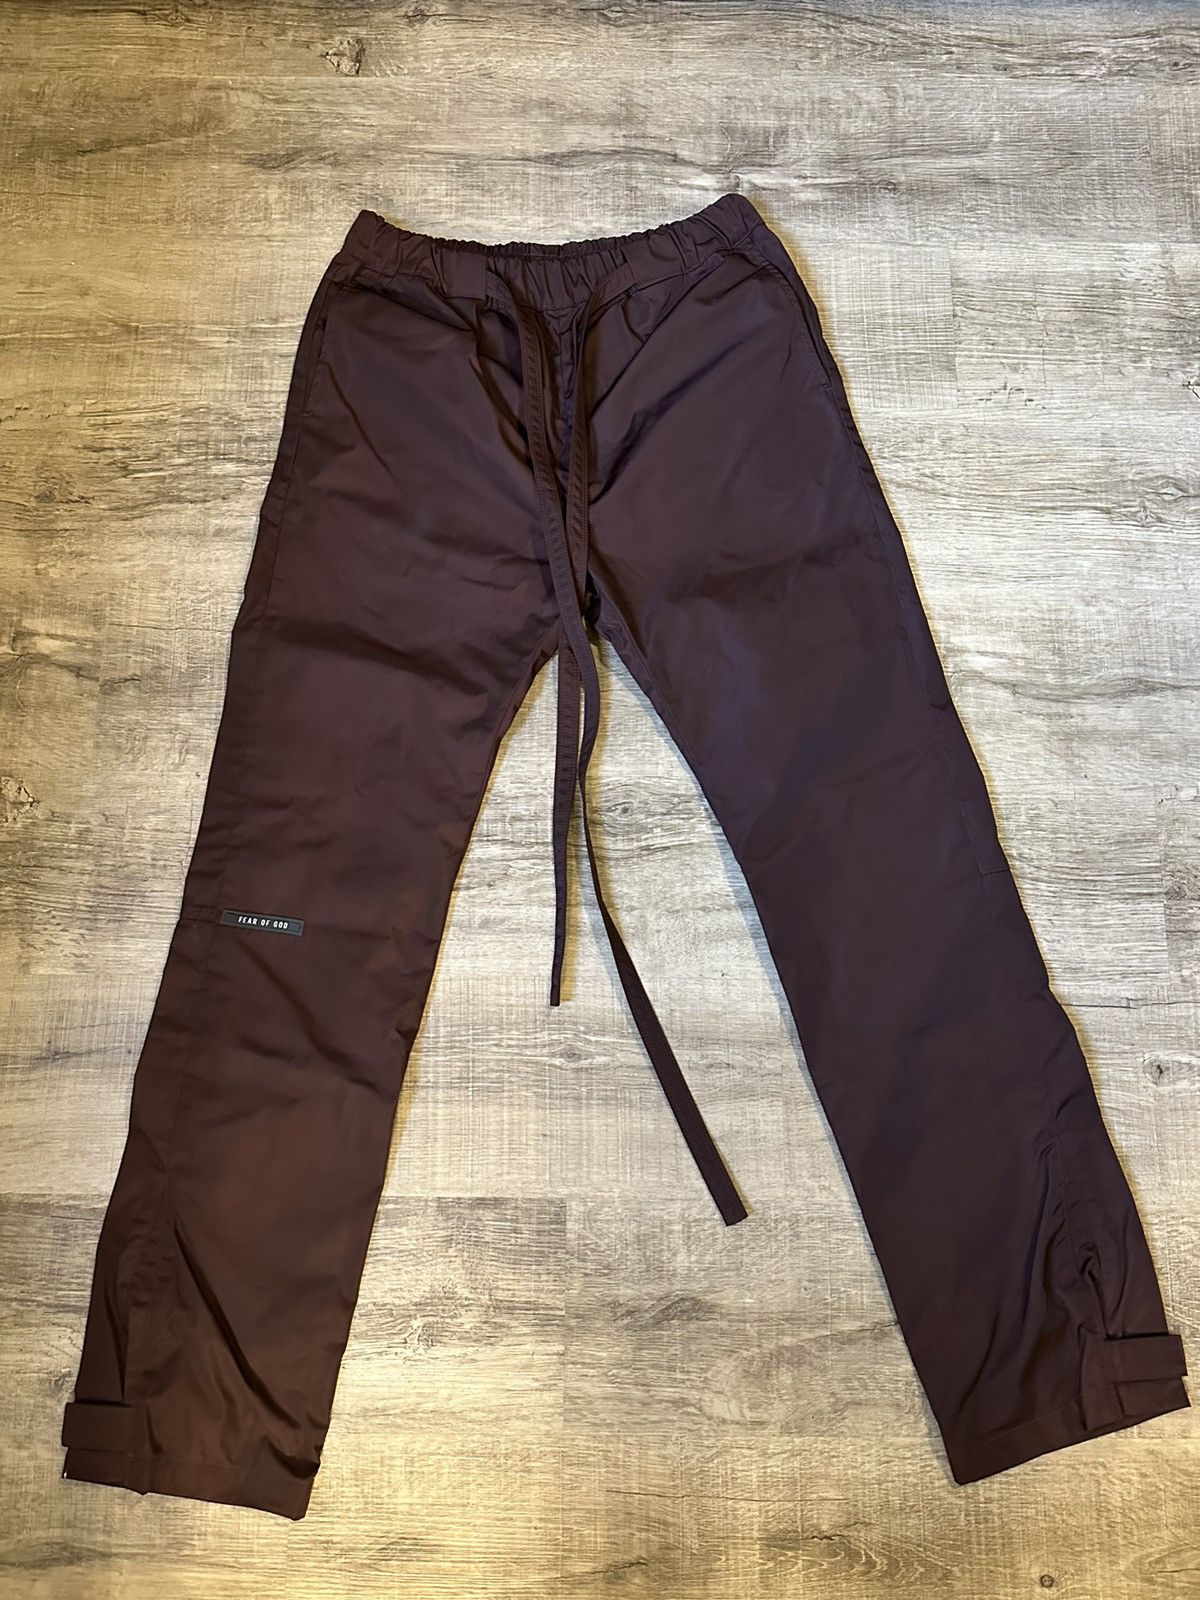 Fear of God Fear of God 6th Collection Merlot Nylon Pants | Grailed